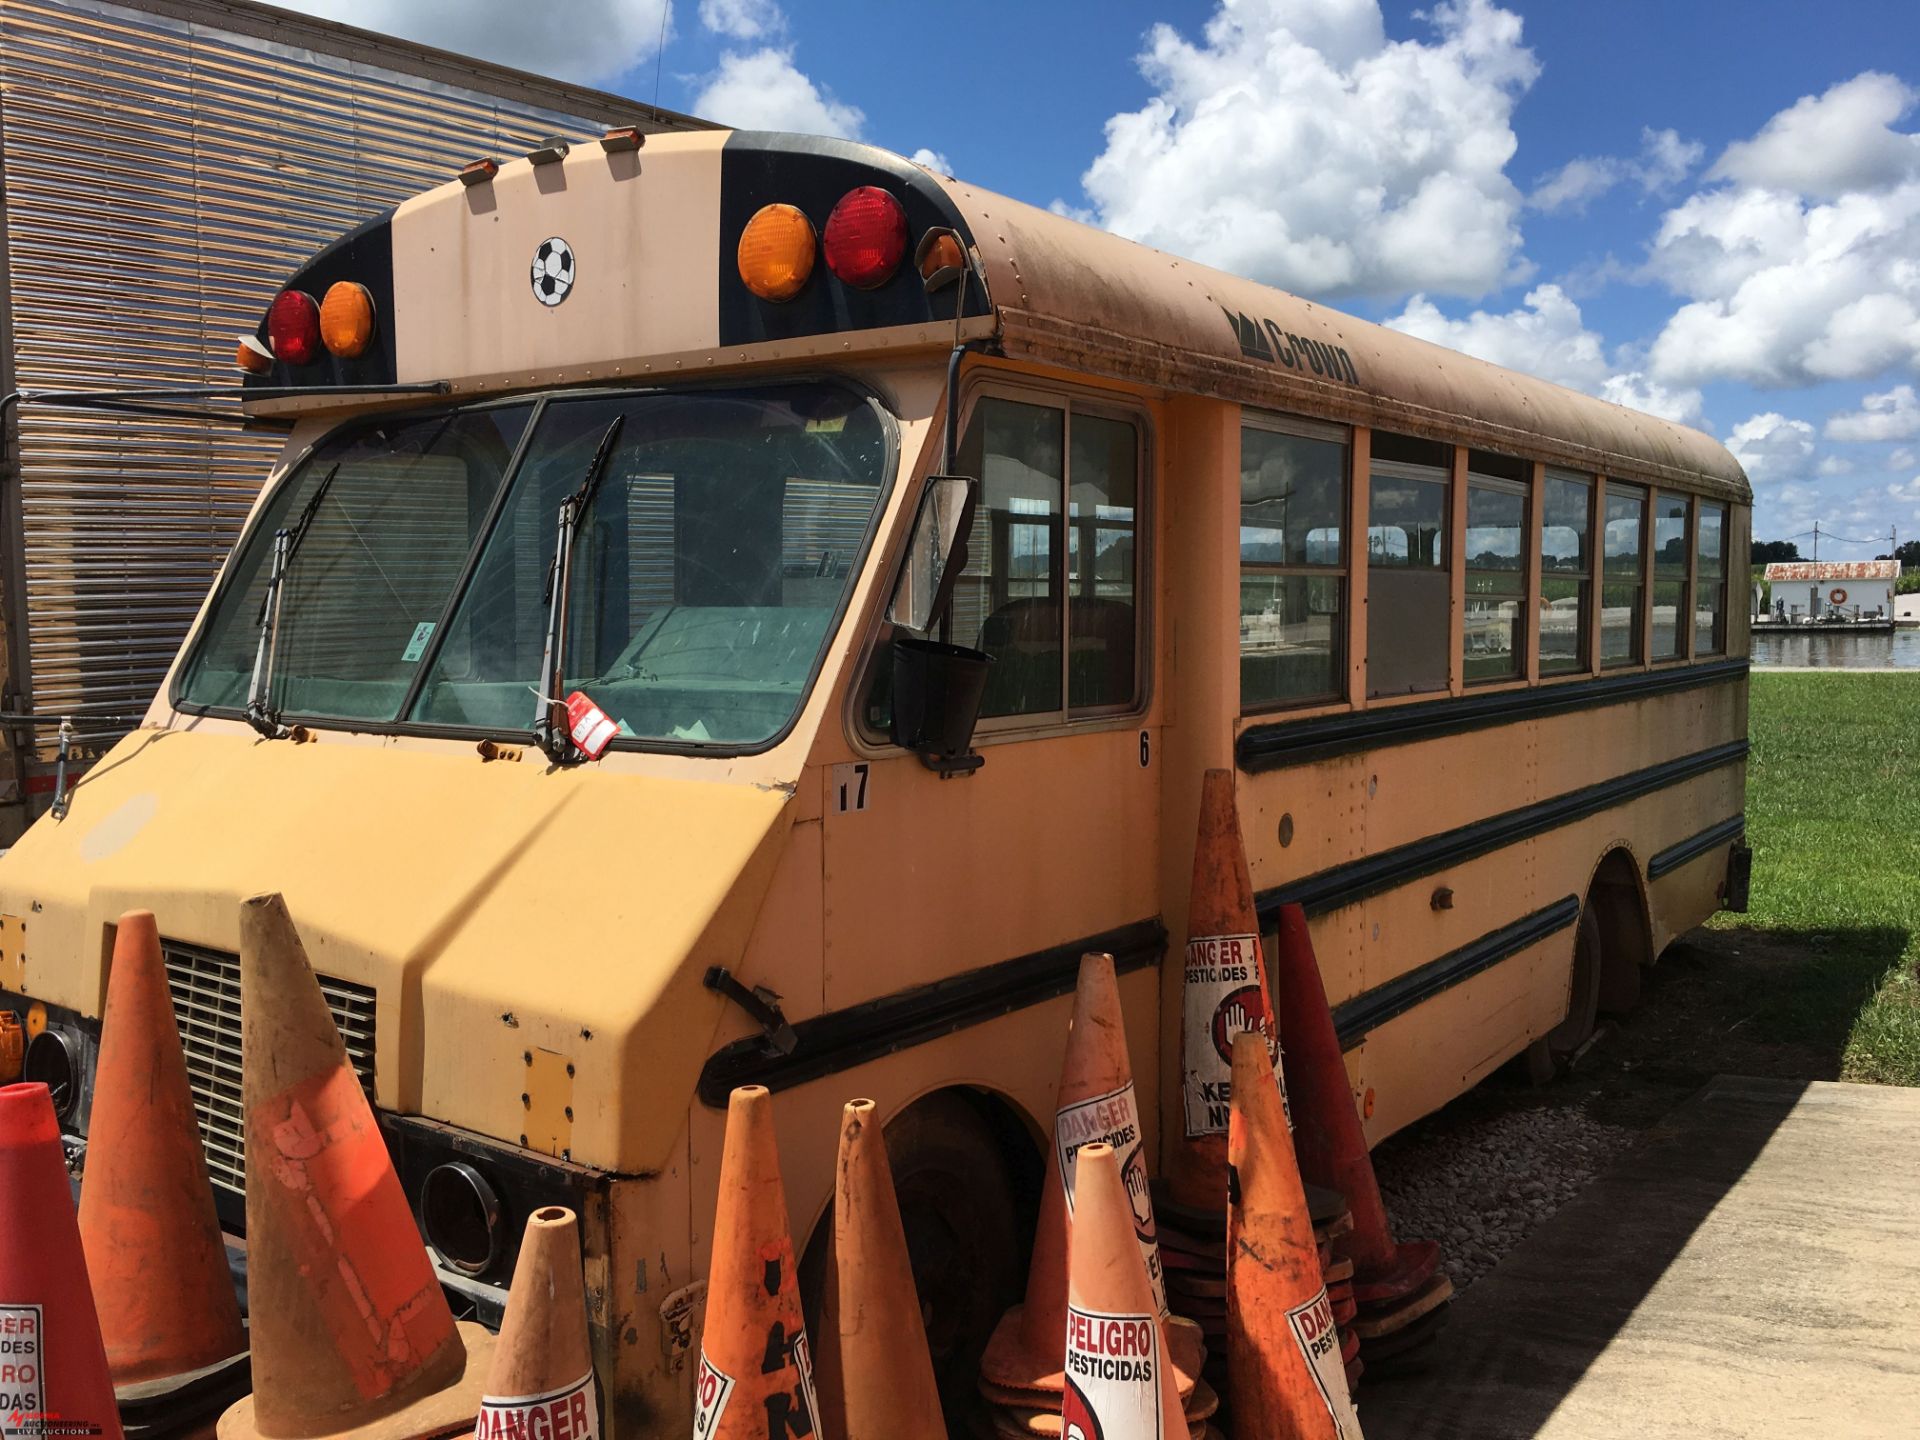 1993 CROWN MINI SCHOOL BUS, 350, AUTOMATIC, BEEN SITTING FOR A LONG TIME, DINGS/SCRATCHES/DENTS/